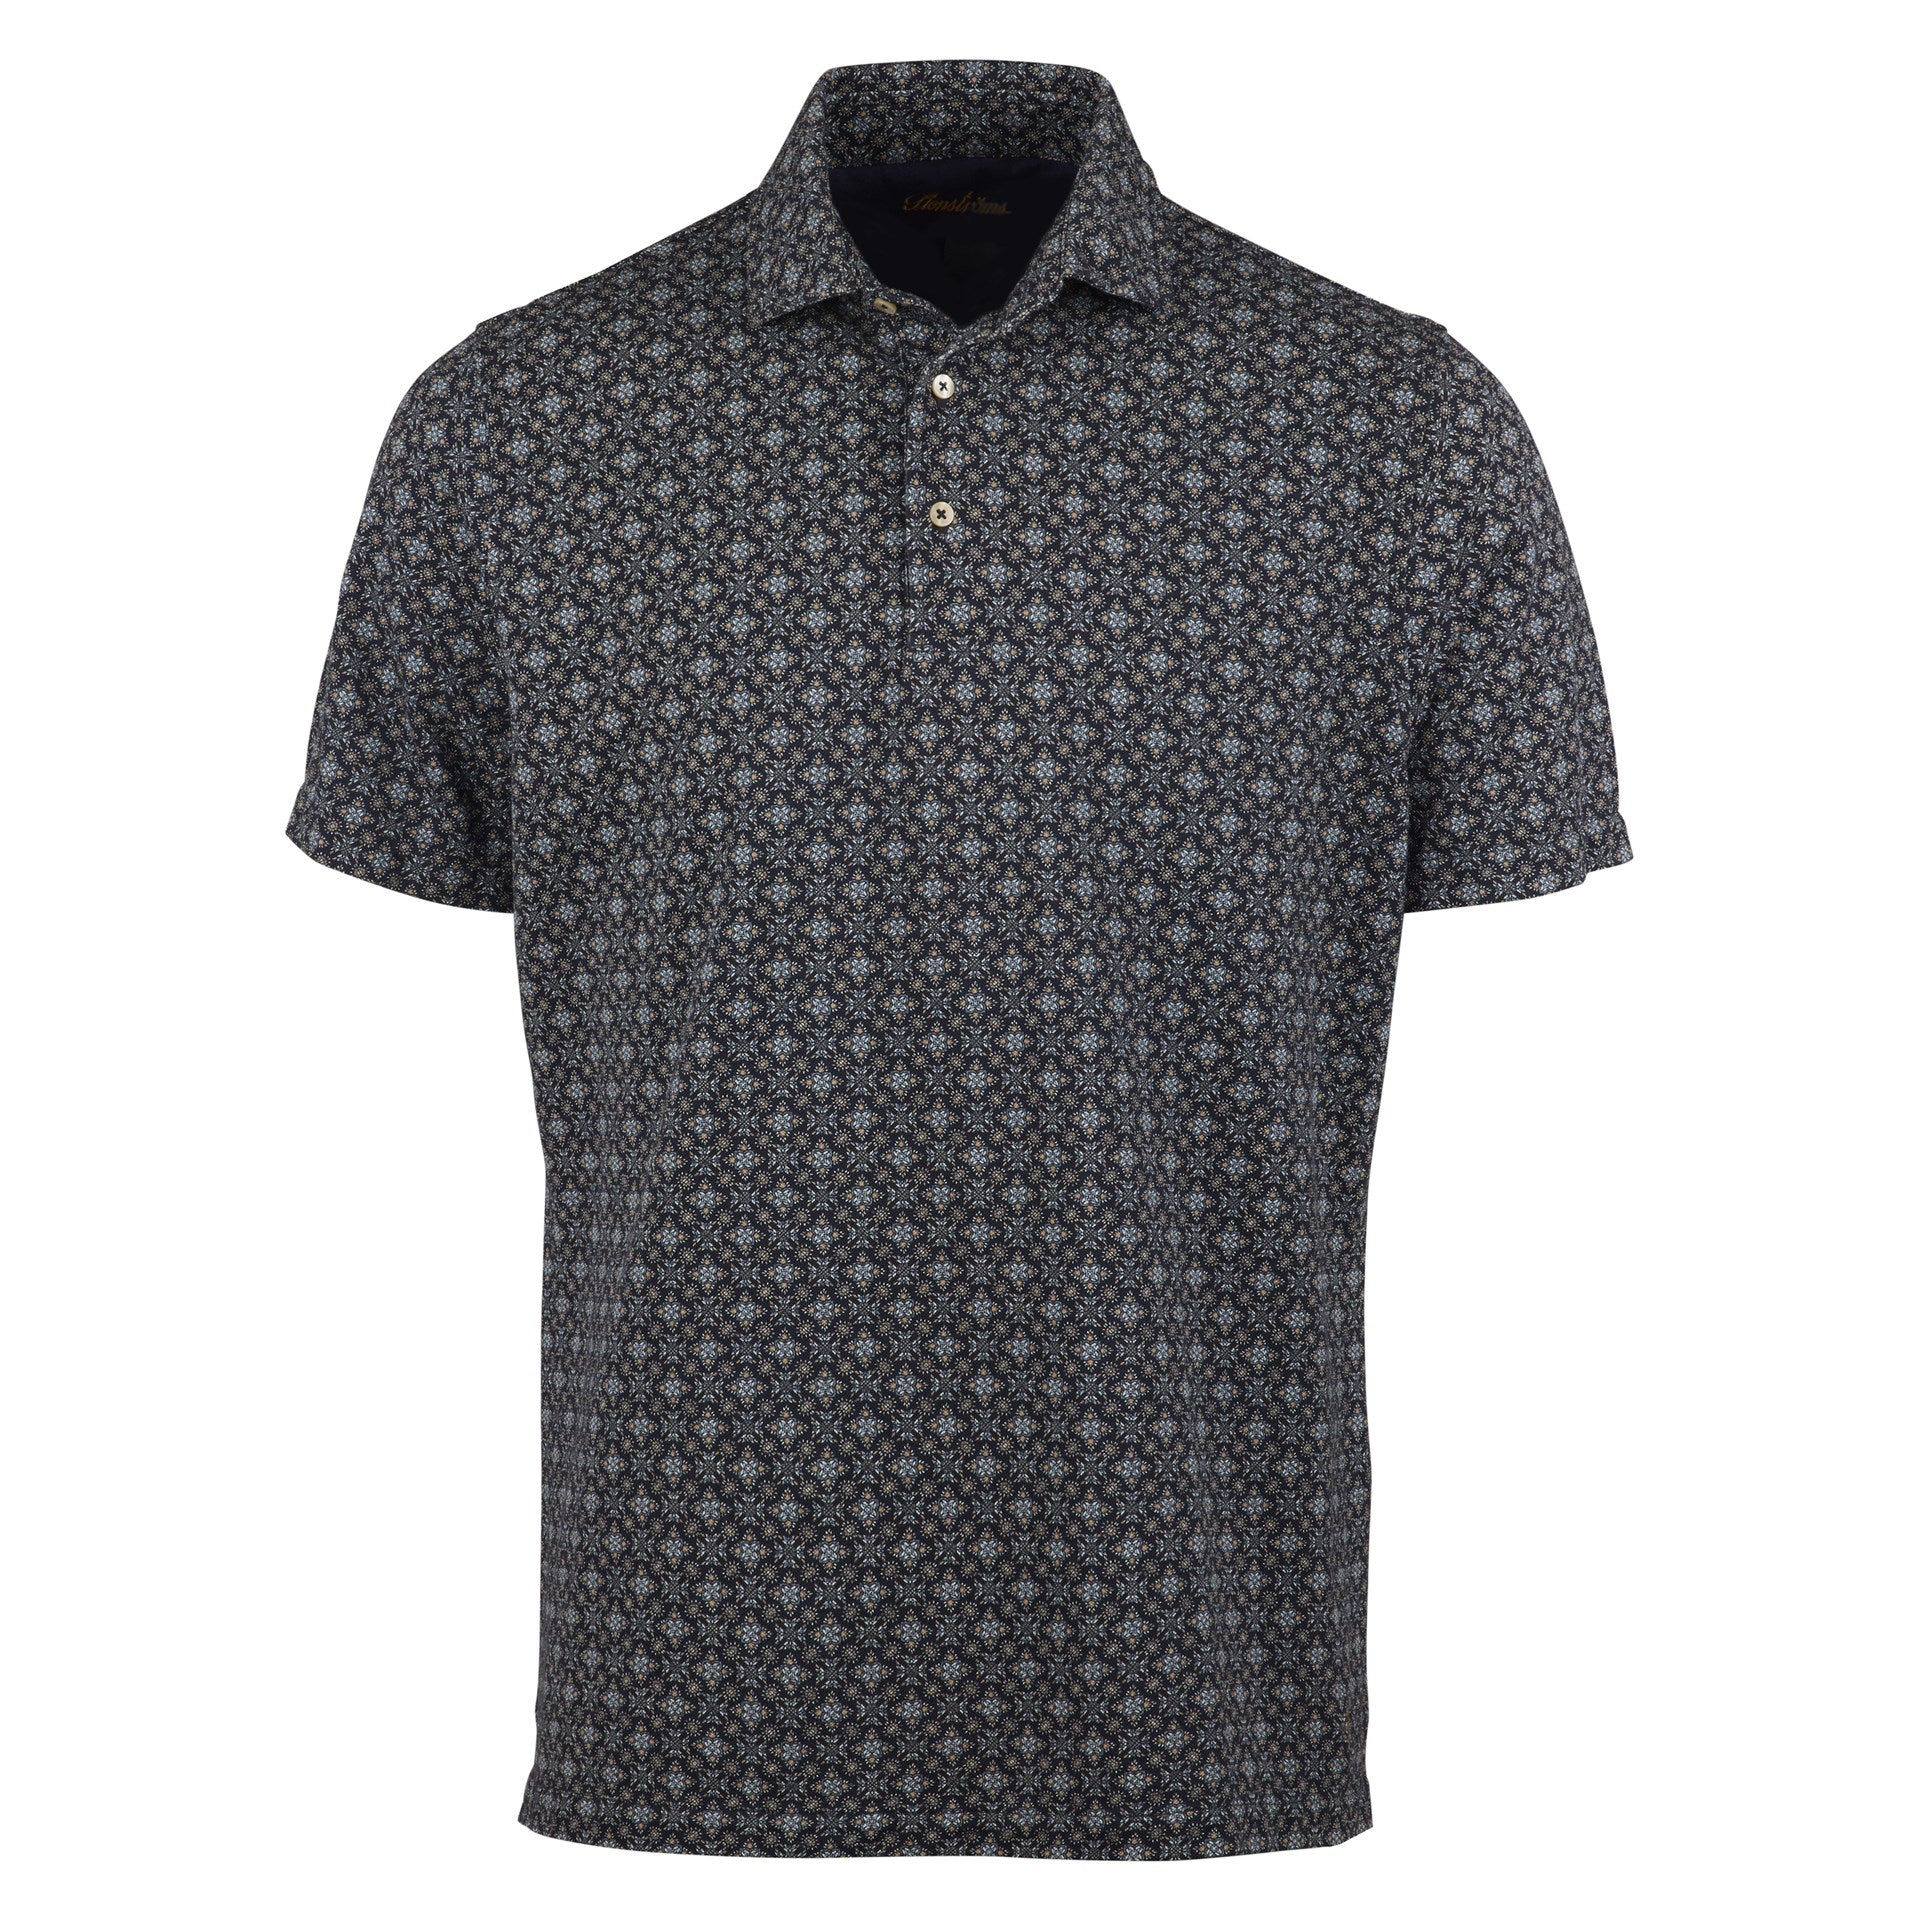 Navy Patterned Polo Shirt